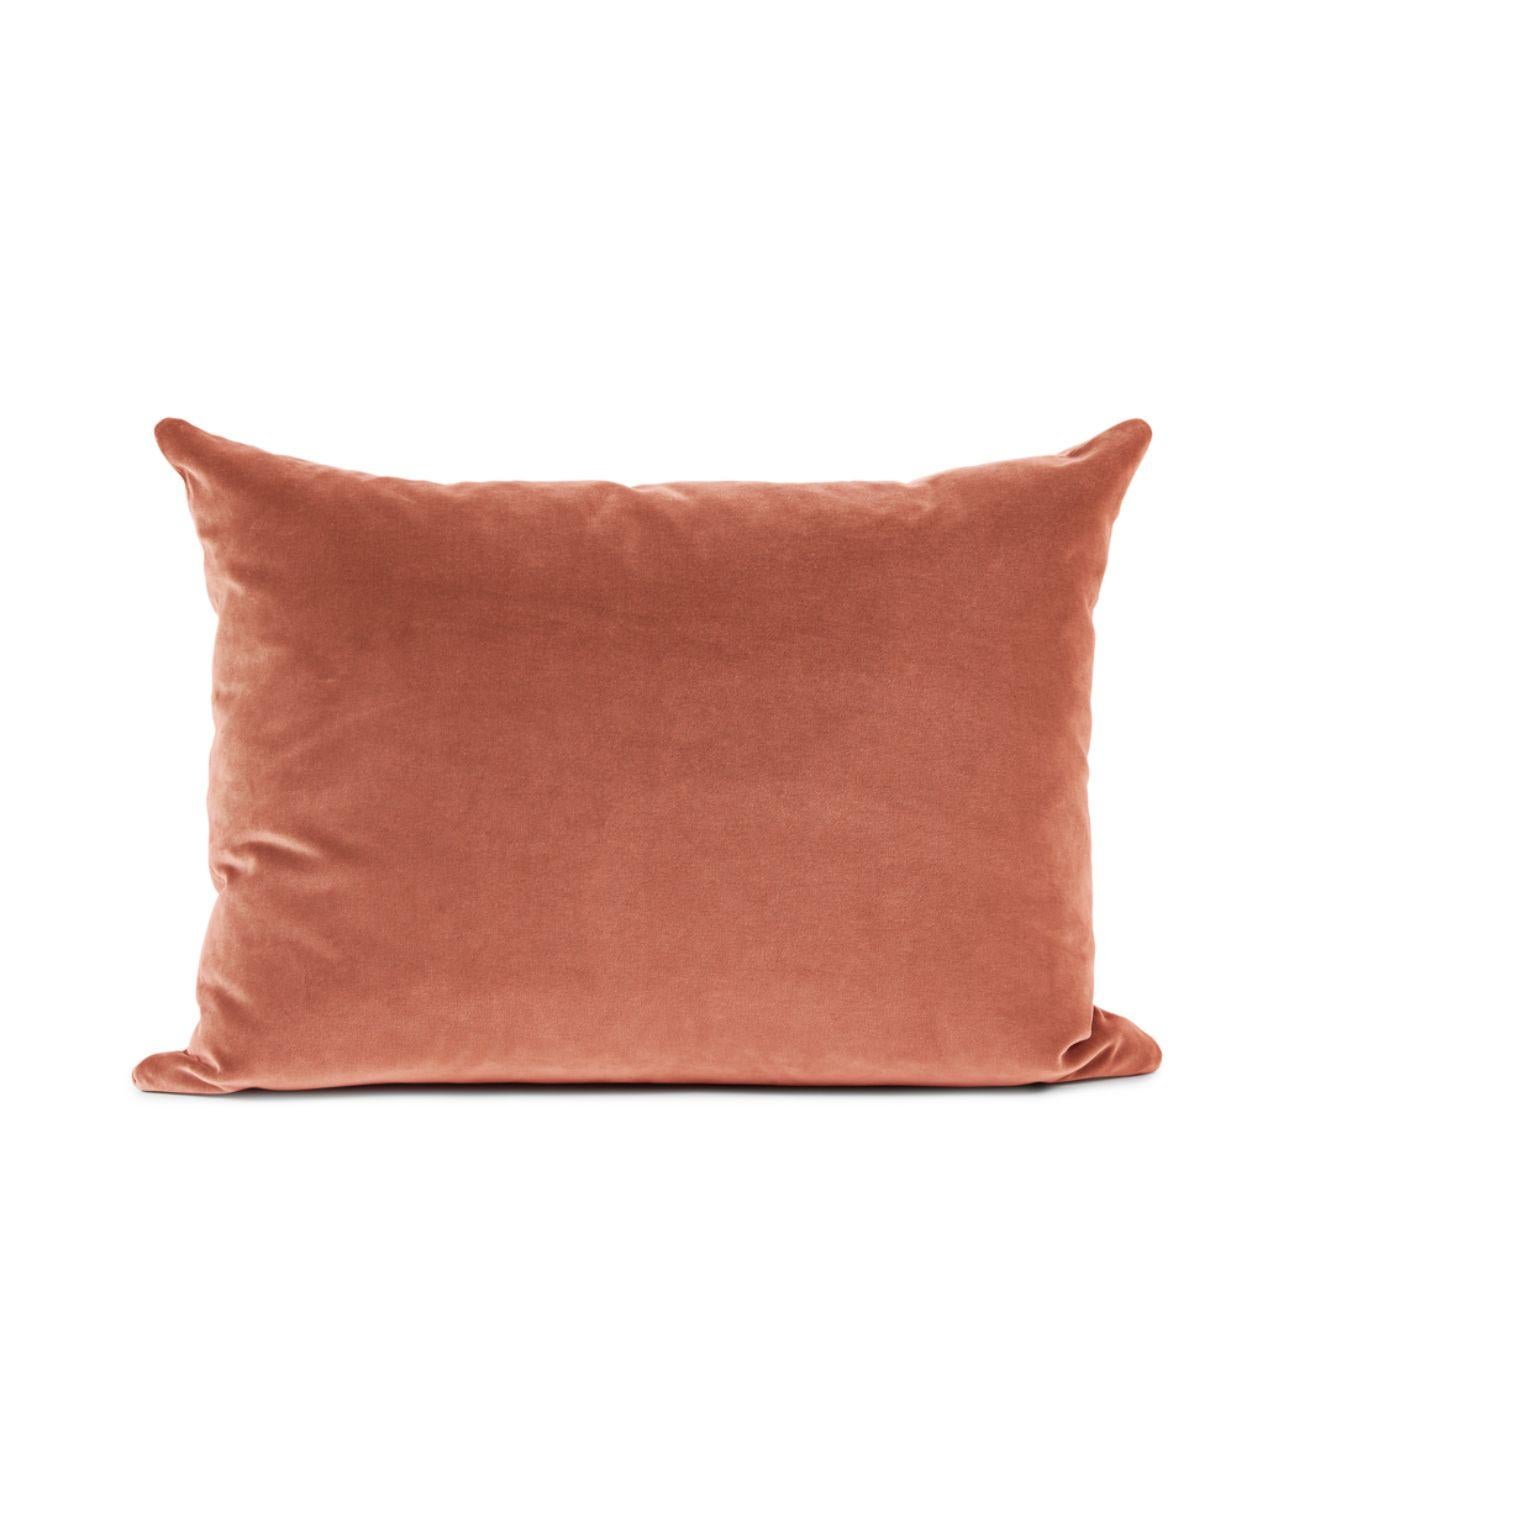 Galore cushion square vintage Rose by Warm Nordic
Dimensions: D 70 x H 50 cm
Material: Textile upholstery, Granulate and feathers filling.
Weight: 1.4 kg
Also available in different colours and finishes.

An elegant oversized sofa cushion,